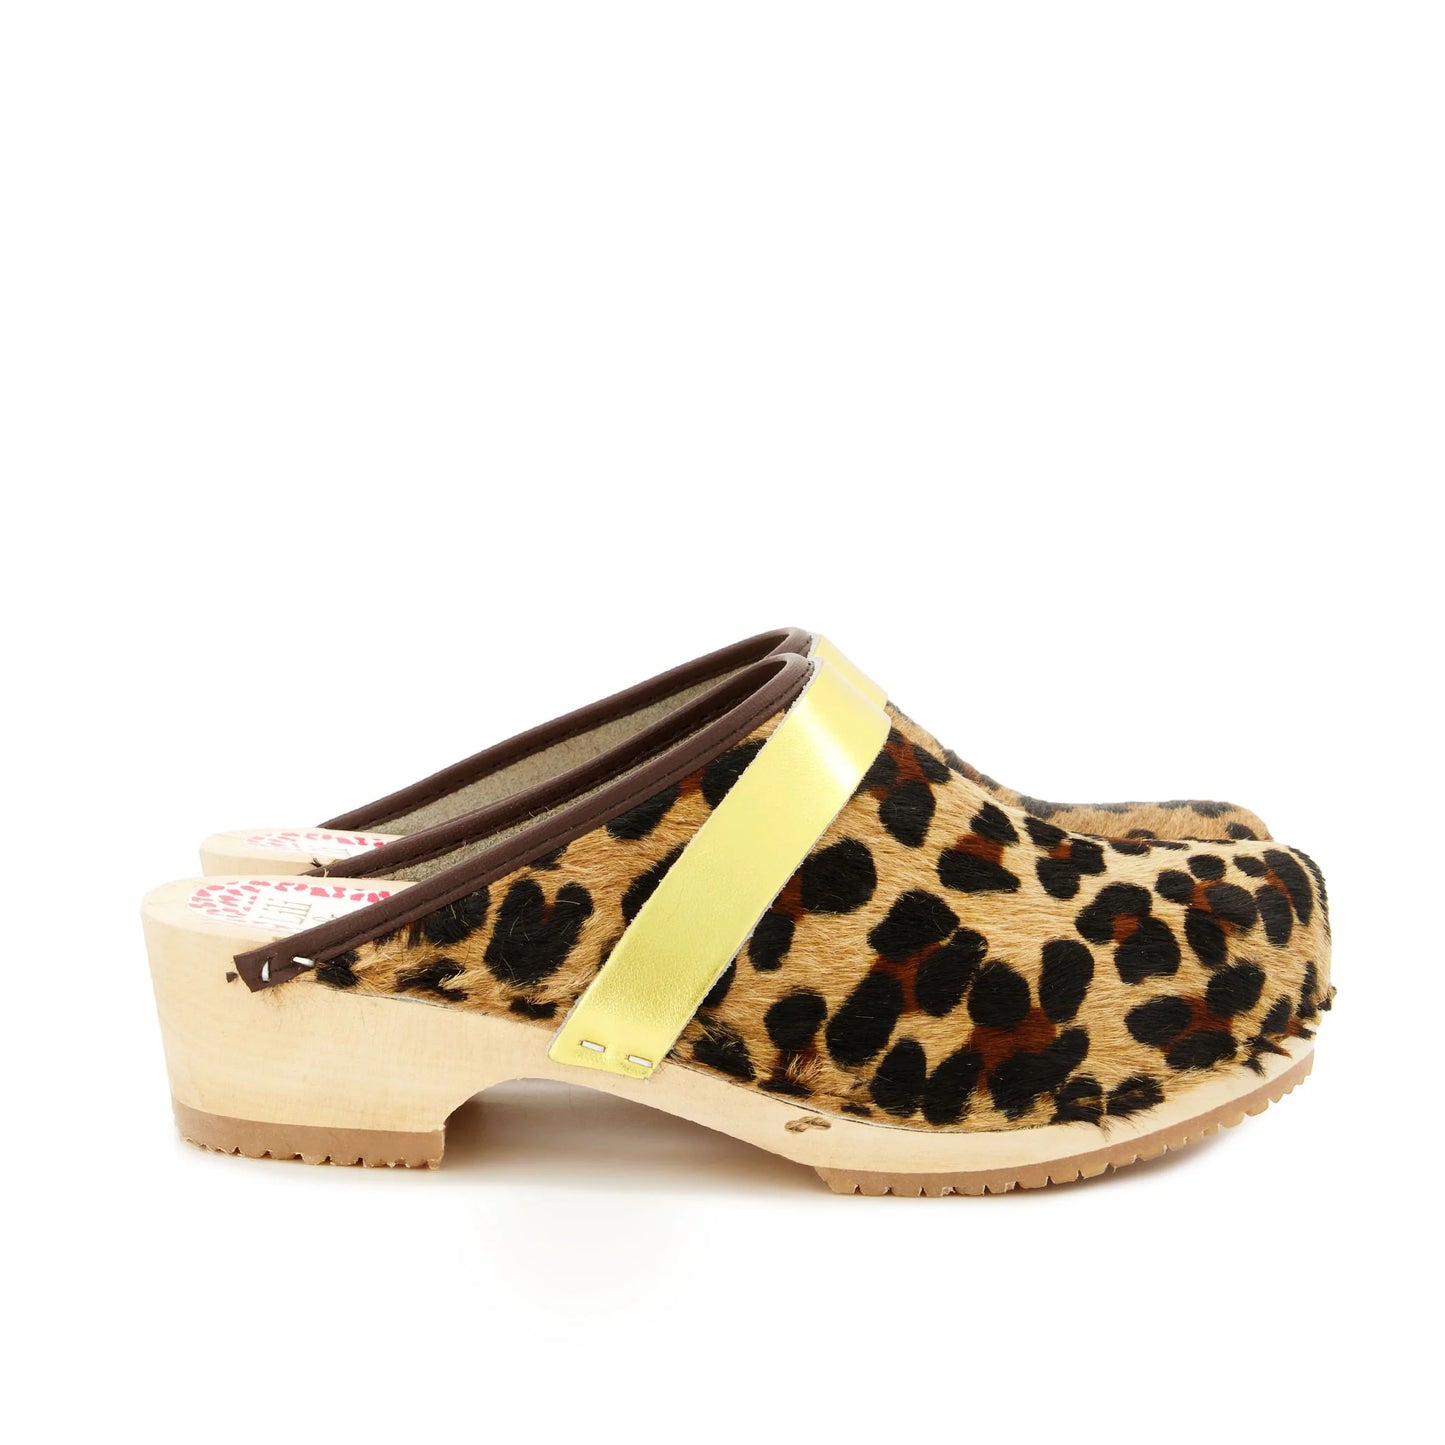 Leopard  Print & Wood Handmade Clogs With Gold Strap (PRE-ORDER)